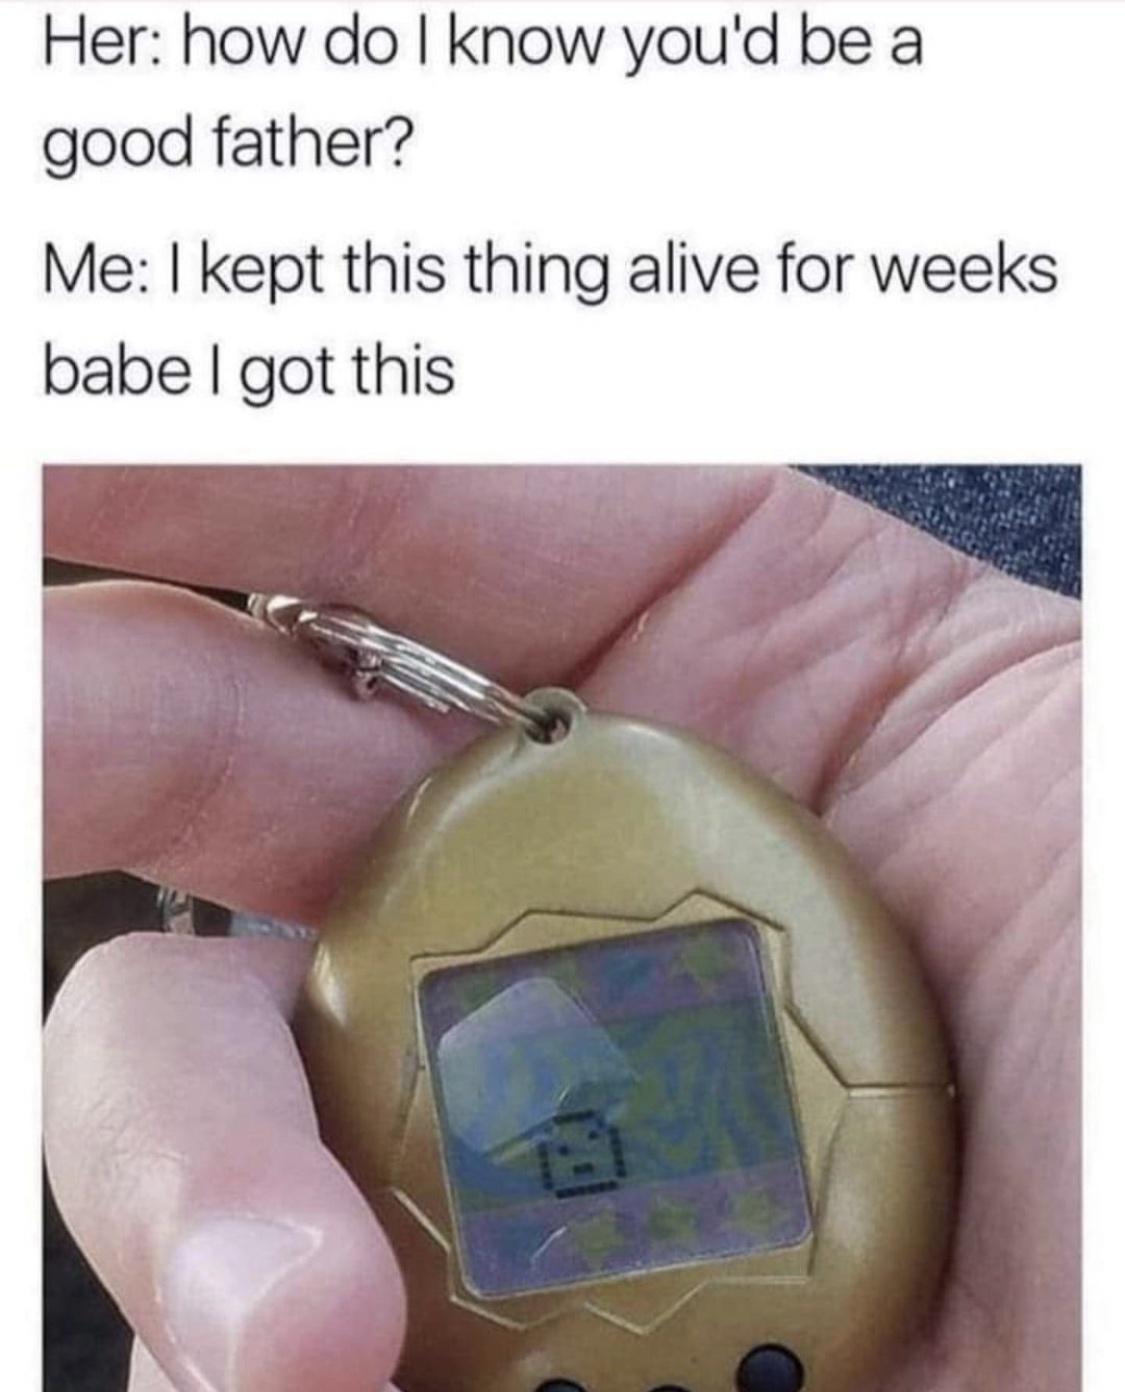 fresh memes - material - Her how do I know you'd be a good father? Me I kept this thing alive for weeks babe I got this